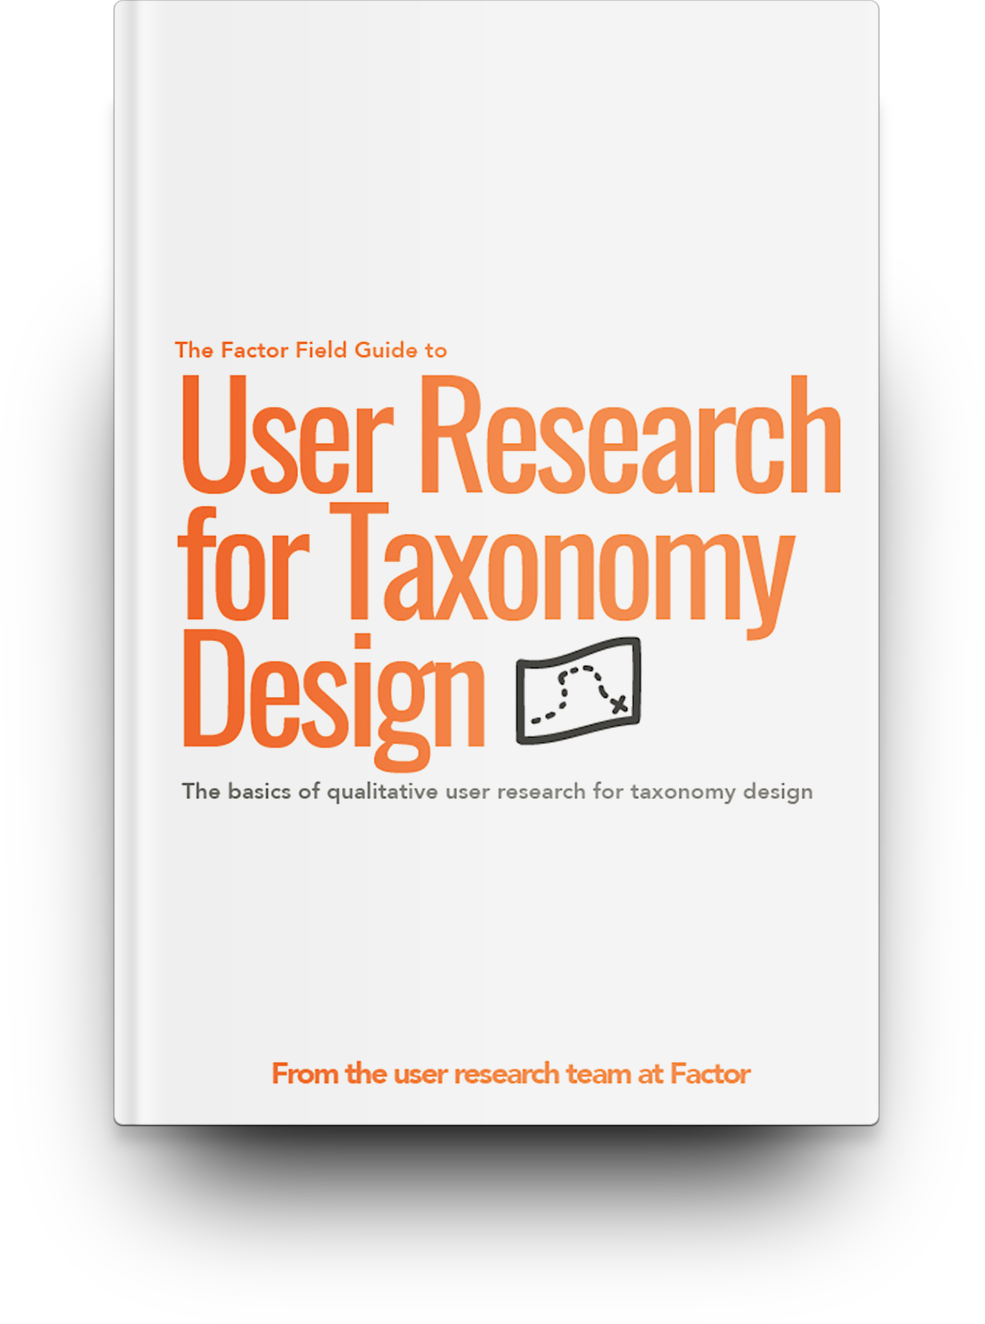 User research for Taxonomy Design ebook